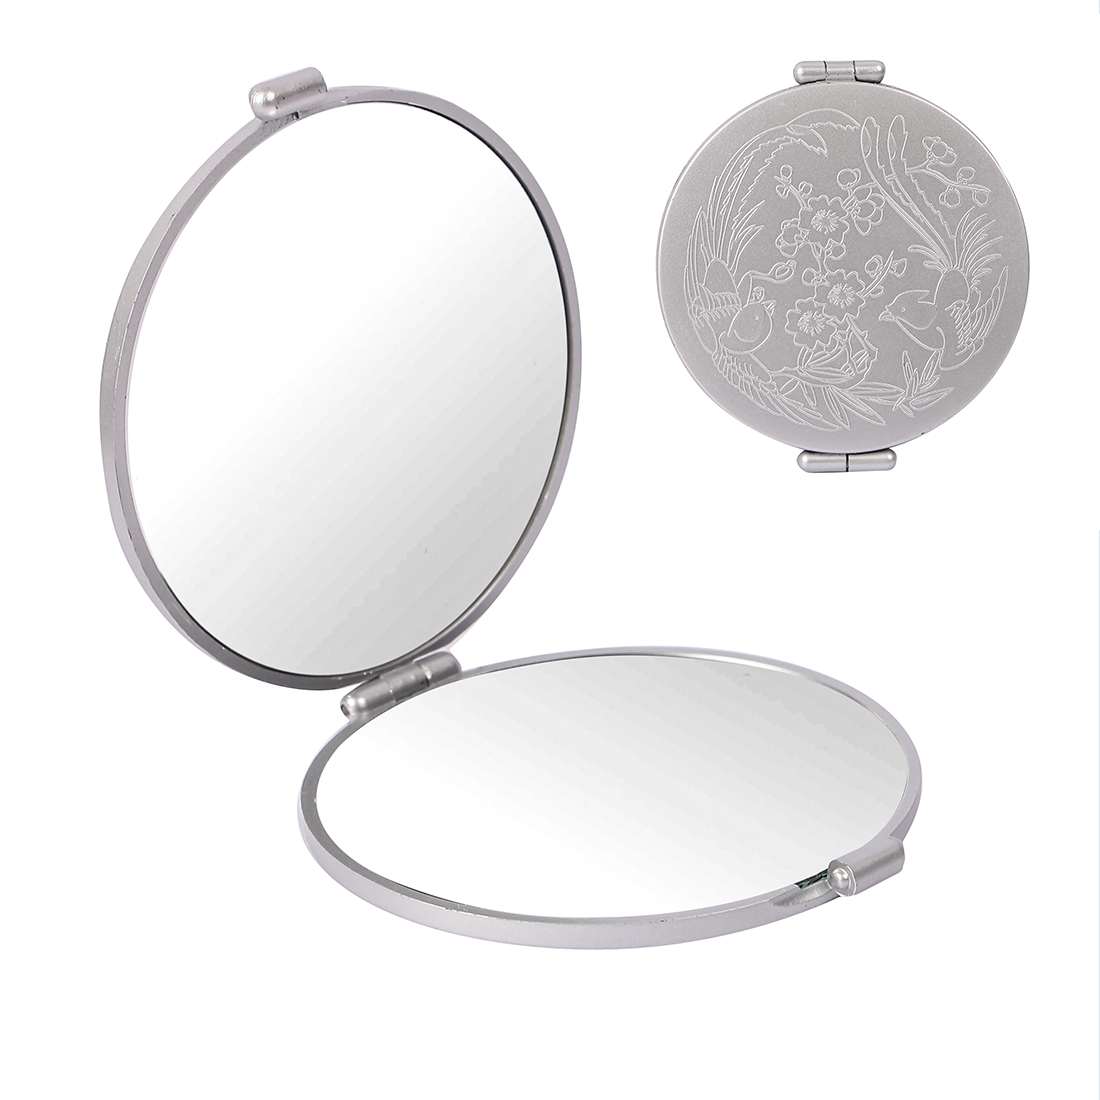 Dual Sided Mirror, 5X Magnifier